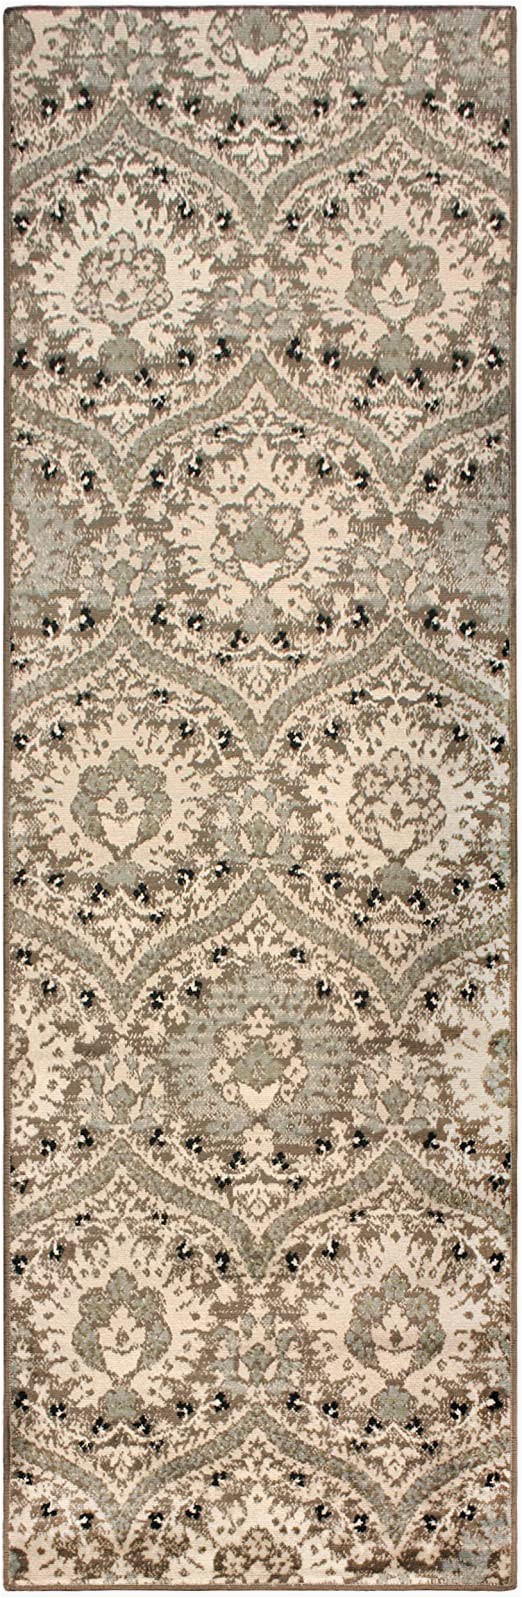 8 by 7 area Rugs Superior Designer Augusta Collection area Rug Modern area Rug 8 Mm Pile Scalloped Floral Design with Jute Backing Light Blue 2 7" X 8